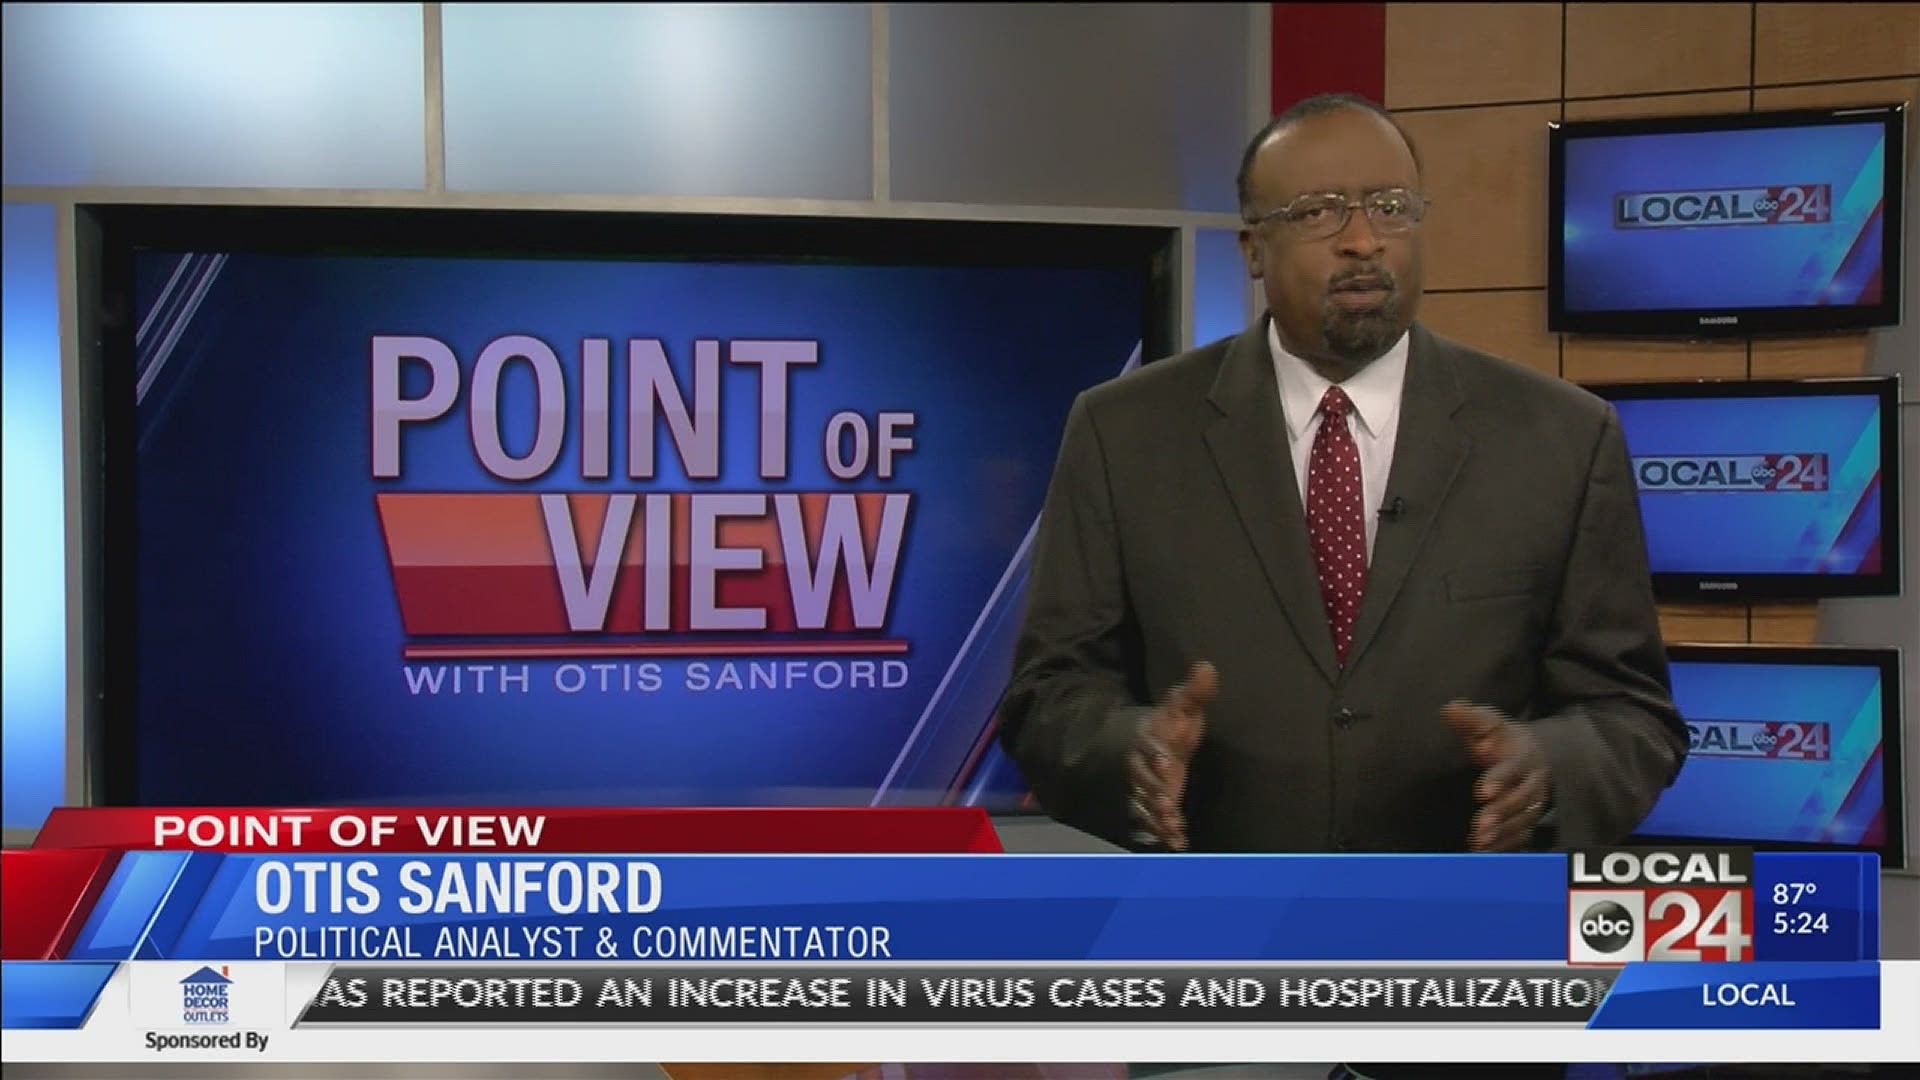 Local 24 News political analyst and commentator Otis Sanford shares his point of view on a march by Mid-South legal professionals.